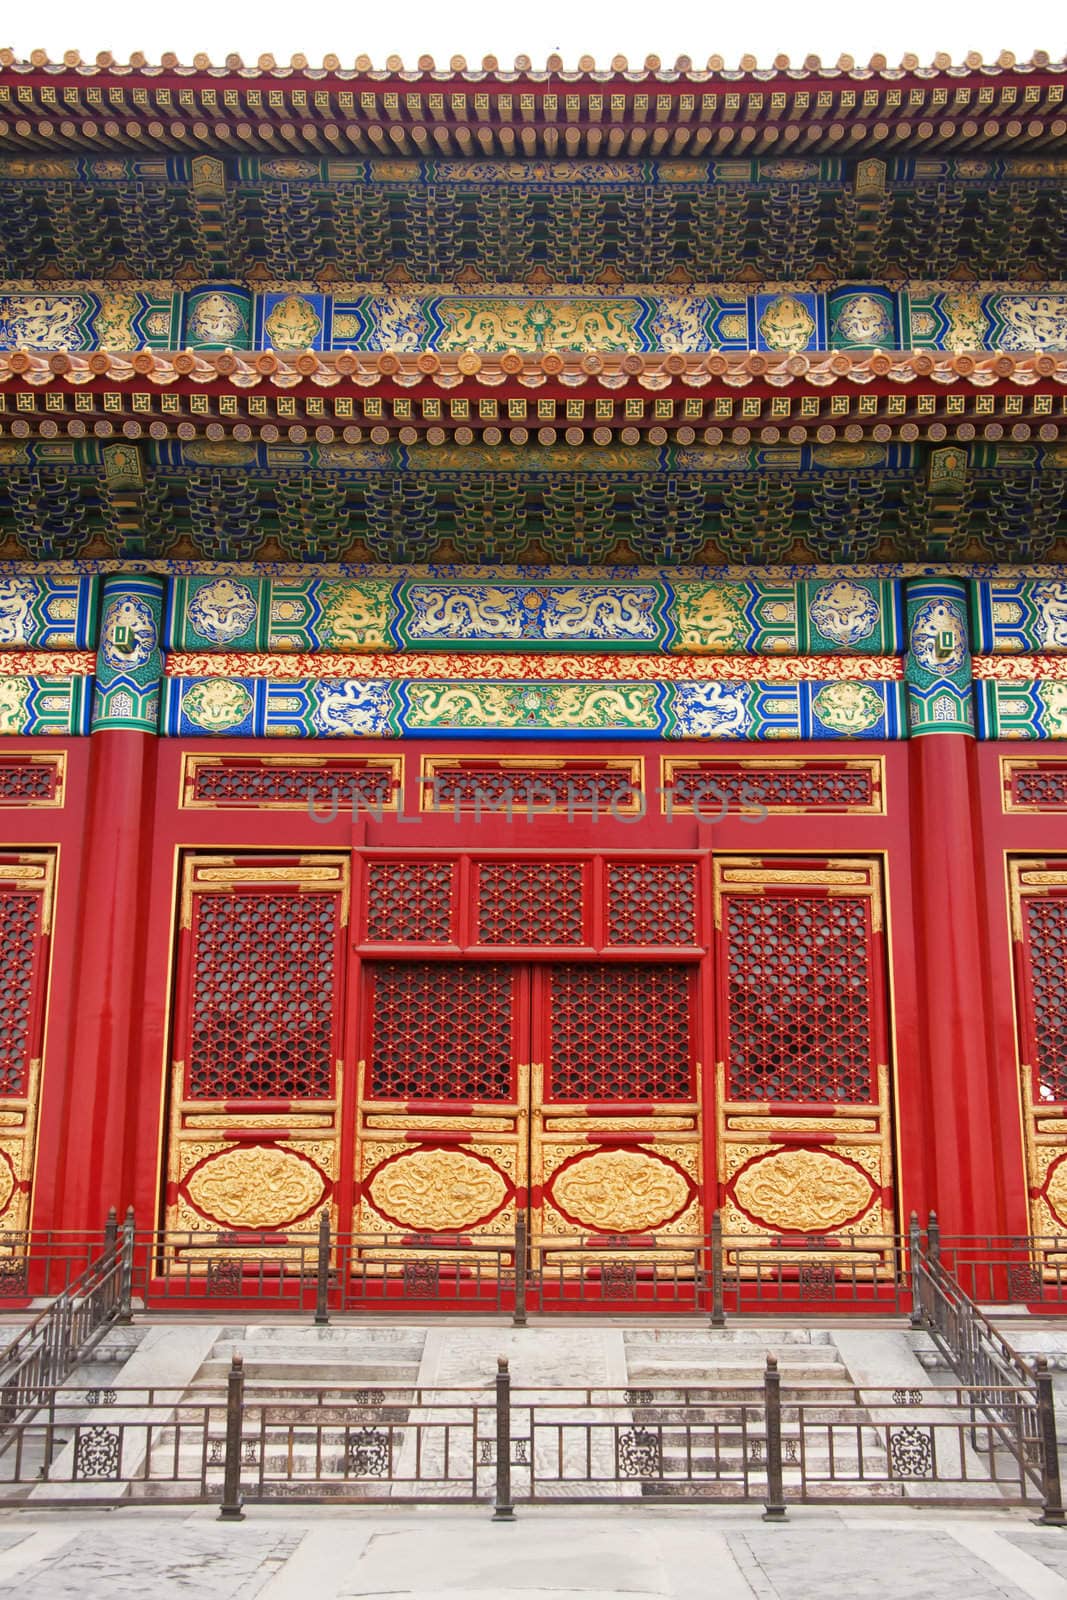 Beijing Forbidden City: entrance to one of the halls.